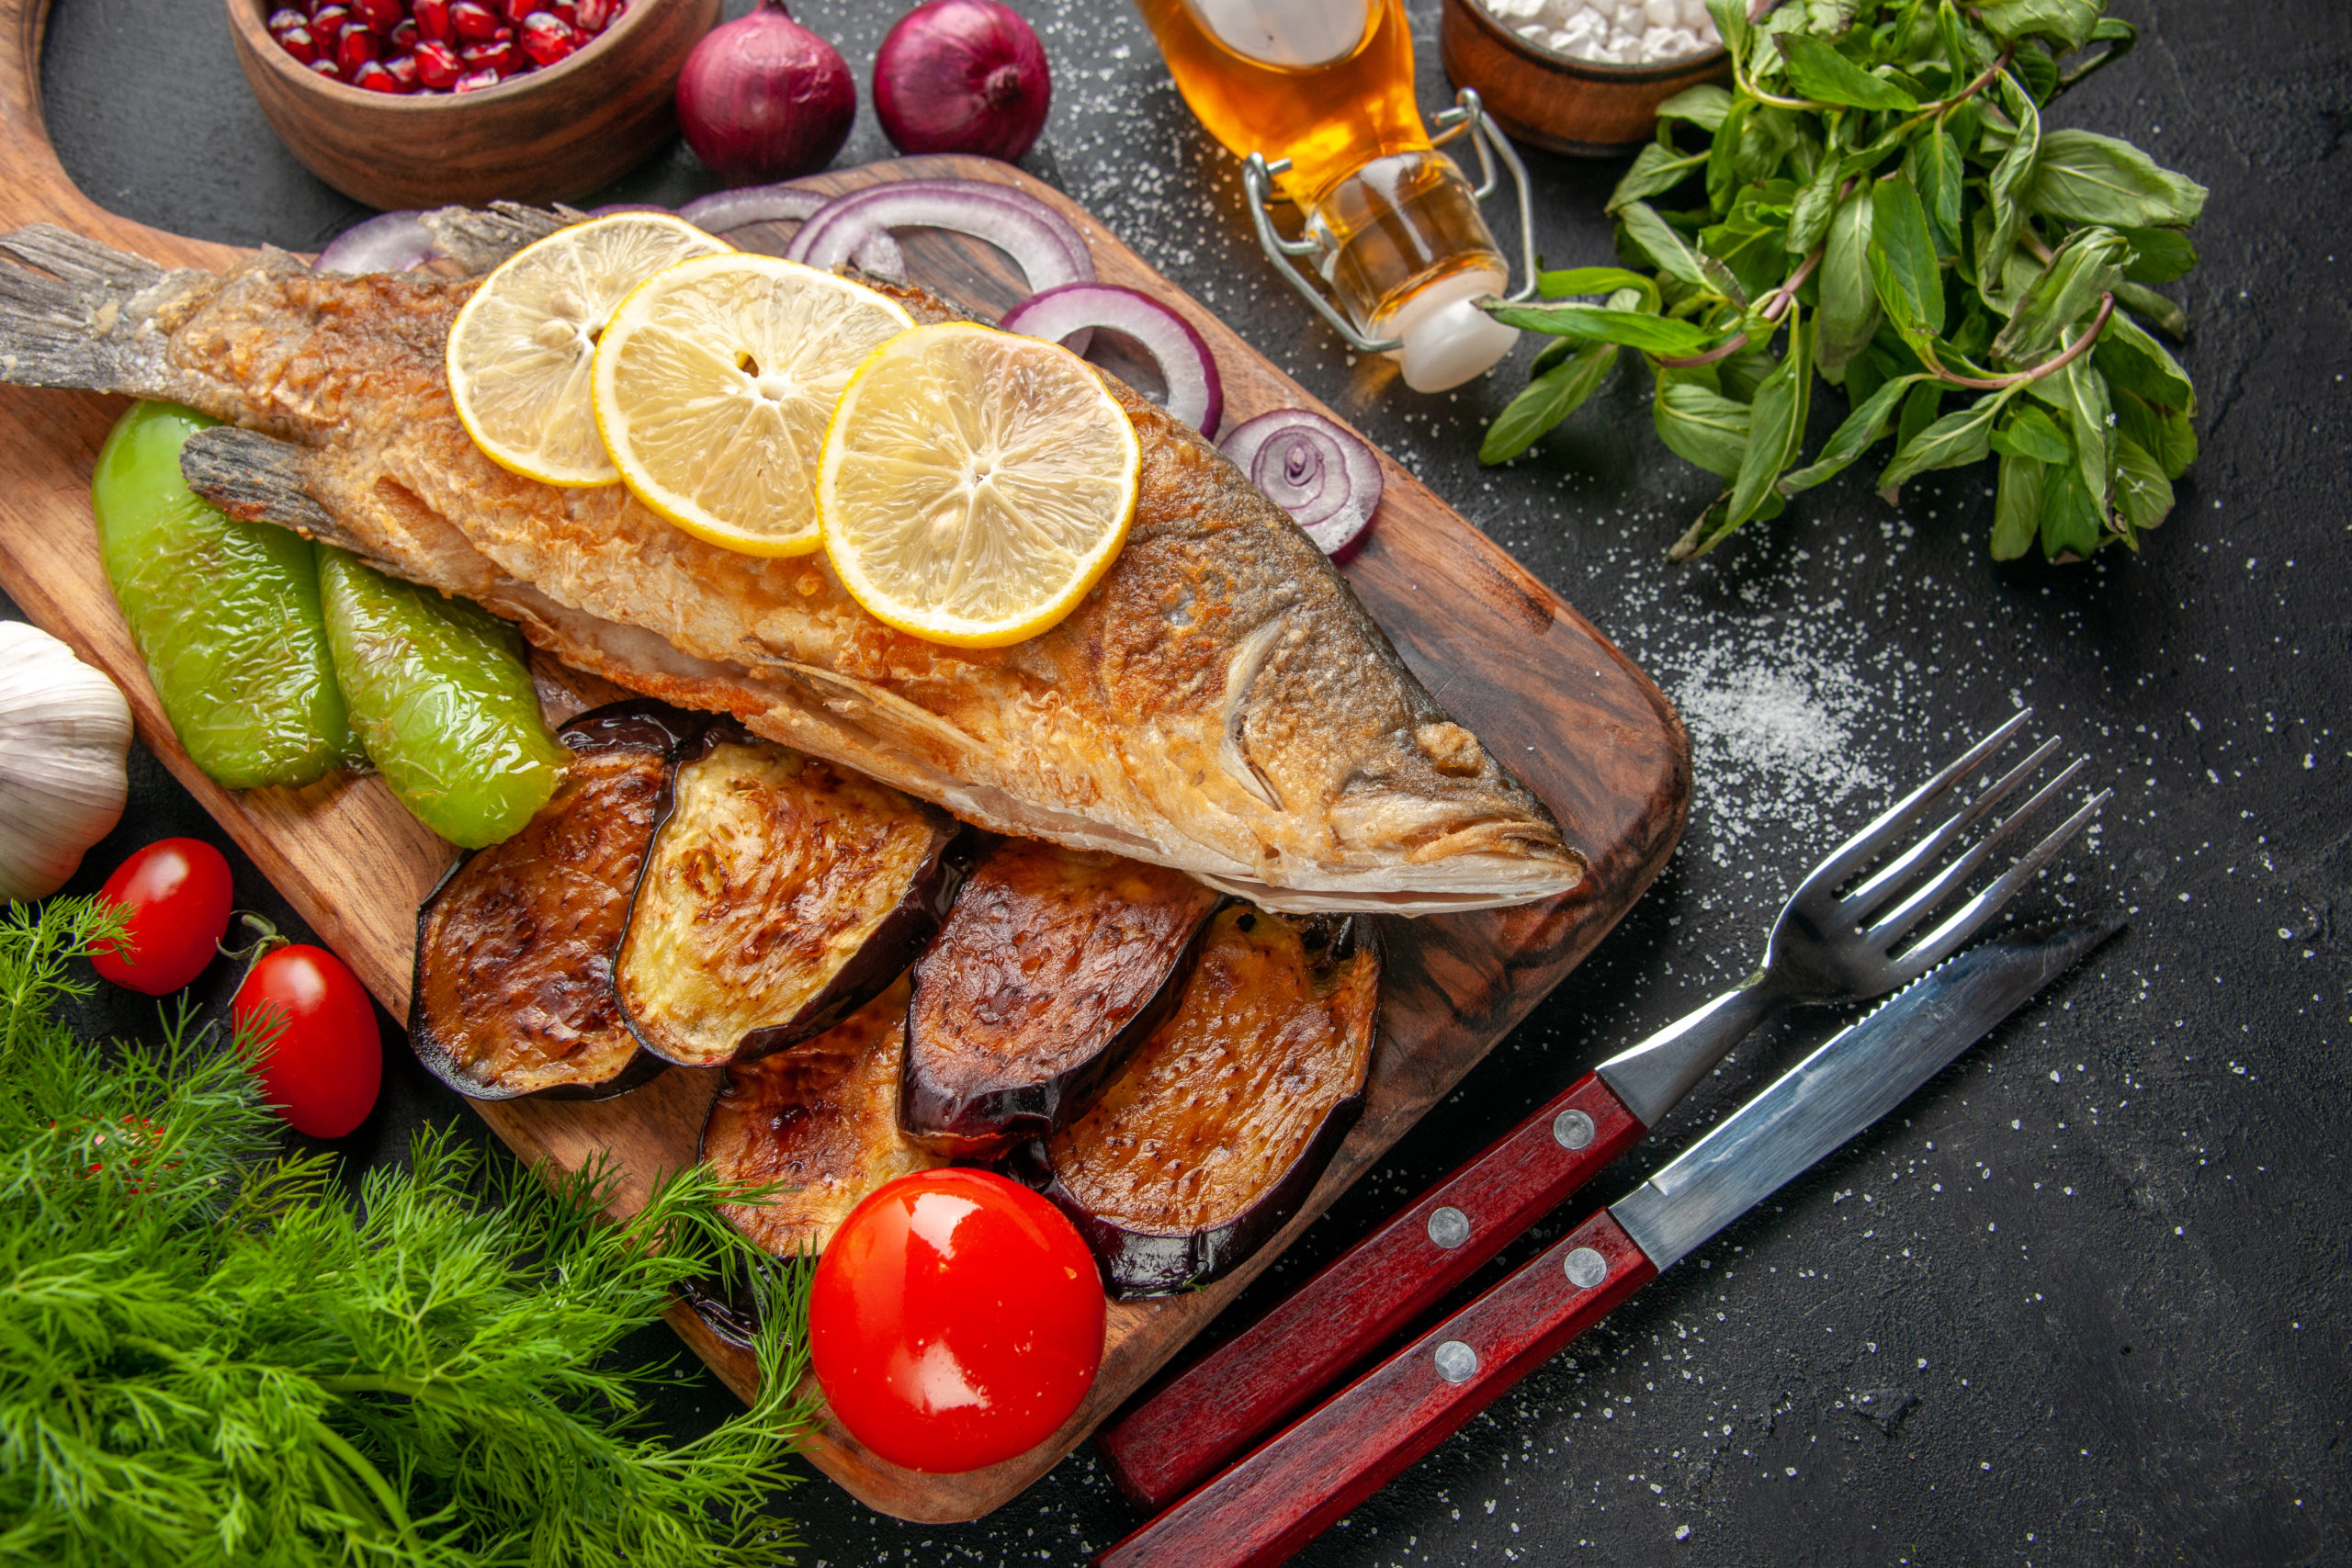 bottom-view-fish-fry-fried-eggplants-onion-peppers-on-wood-board-spices-in-small-bowls-fork-and-knife-tomatoes-oil-bottle-mint-dill-on-dark-background